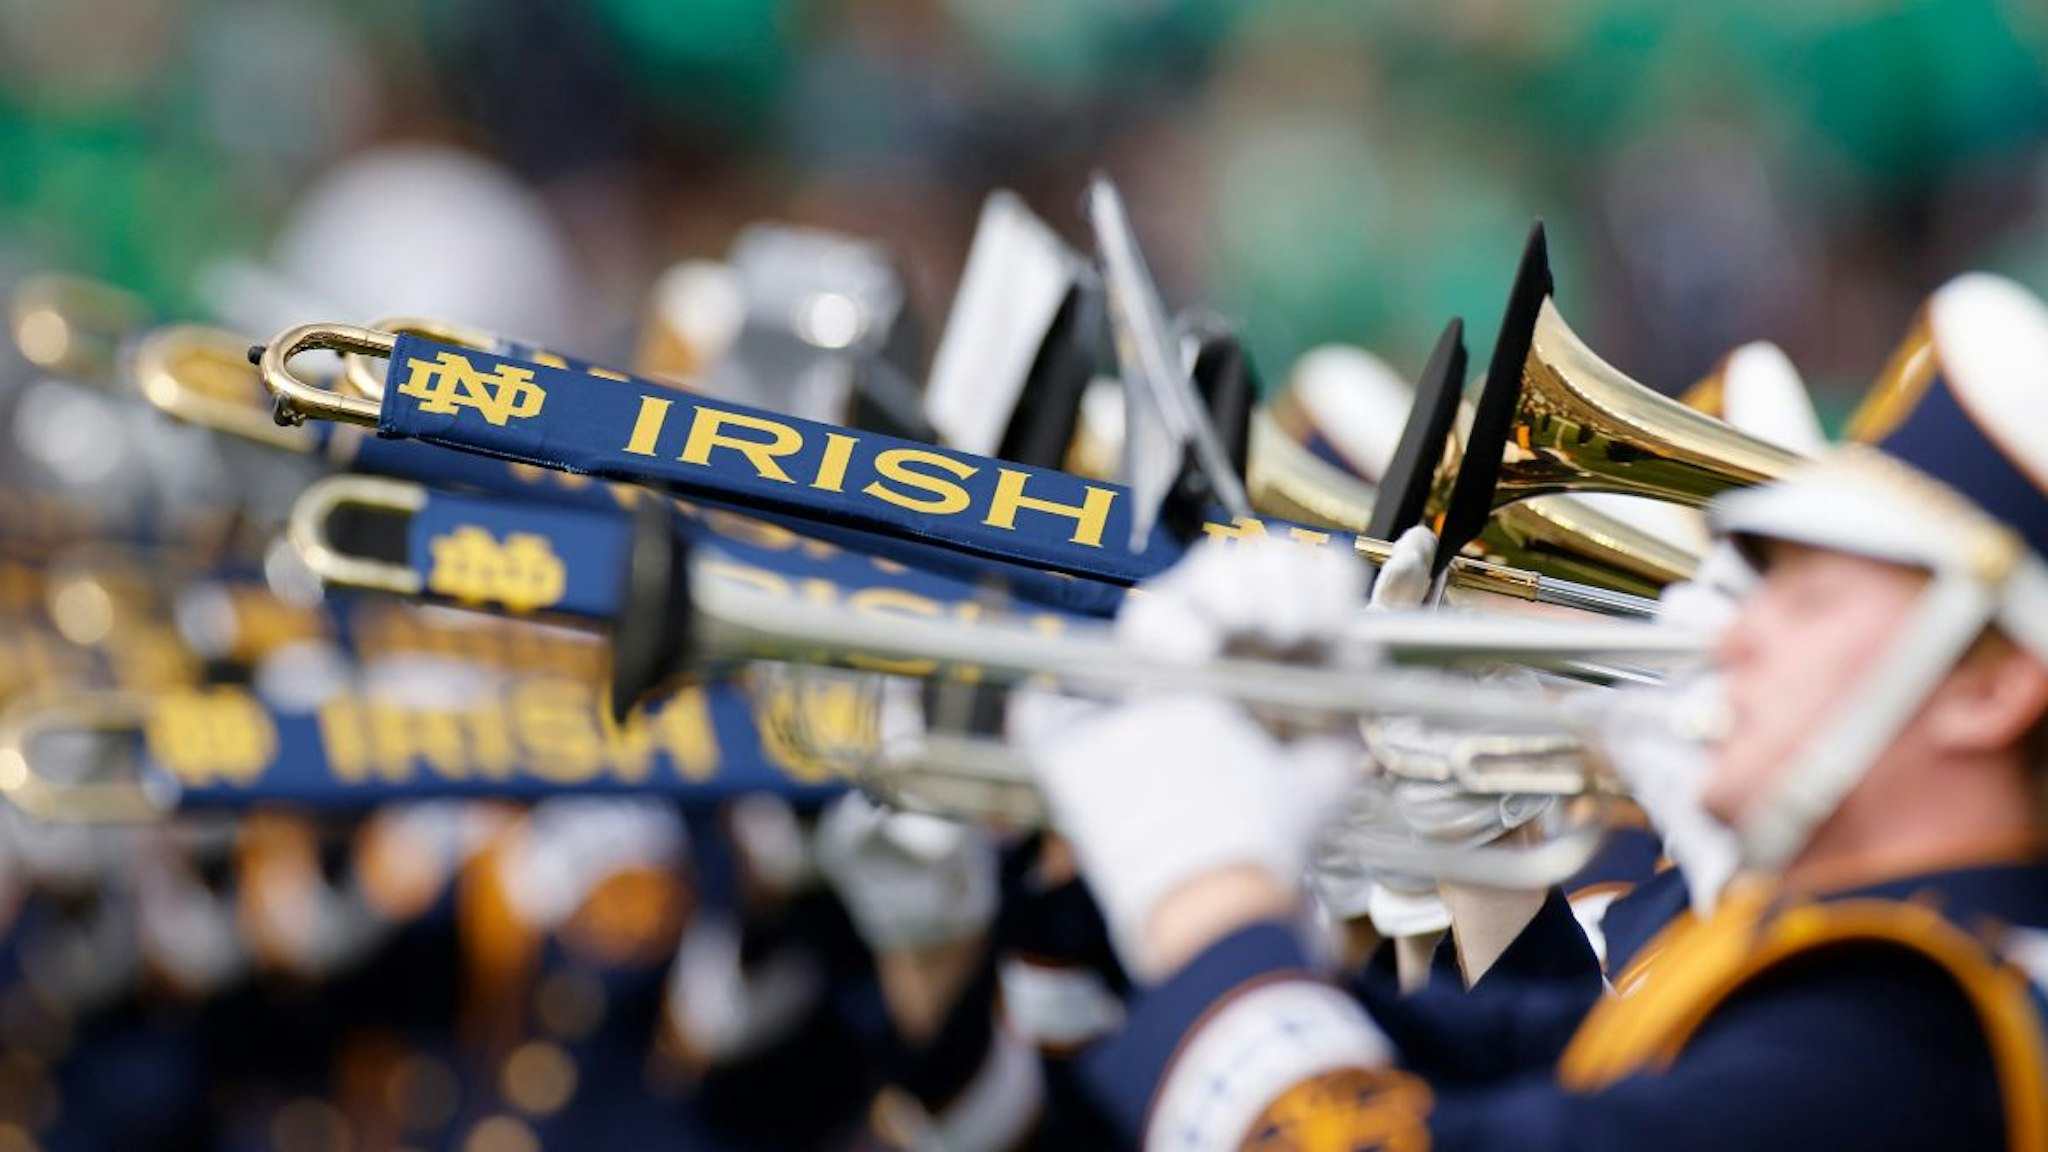 The Notre Dame Fighting Irish marching band performs on the field prior to a college football game against the Cincinnati Bearcats on Oct. 2, 2021 at Notre Dame Stadium in South Bend, Indiana.